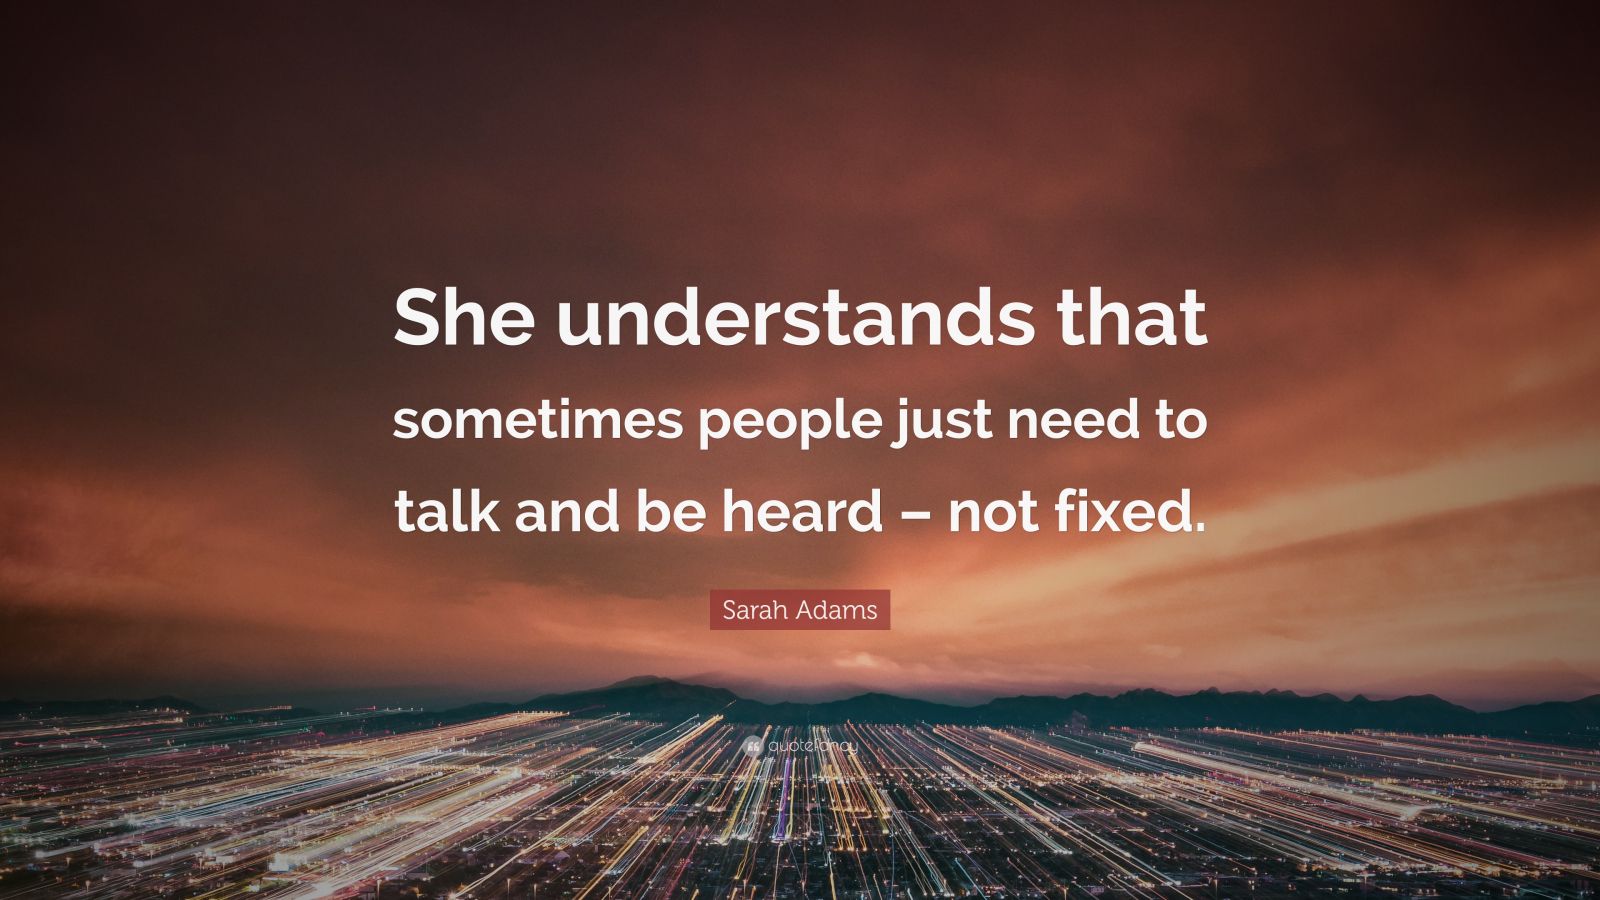 Sarah Adams Quote: “She understands that sometimes people just need to ...